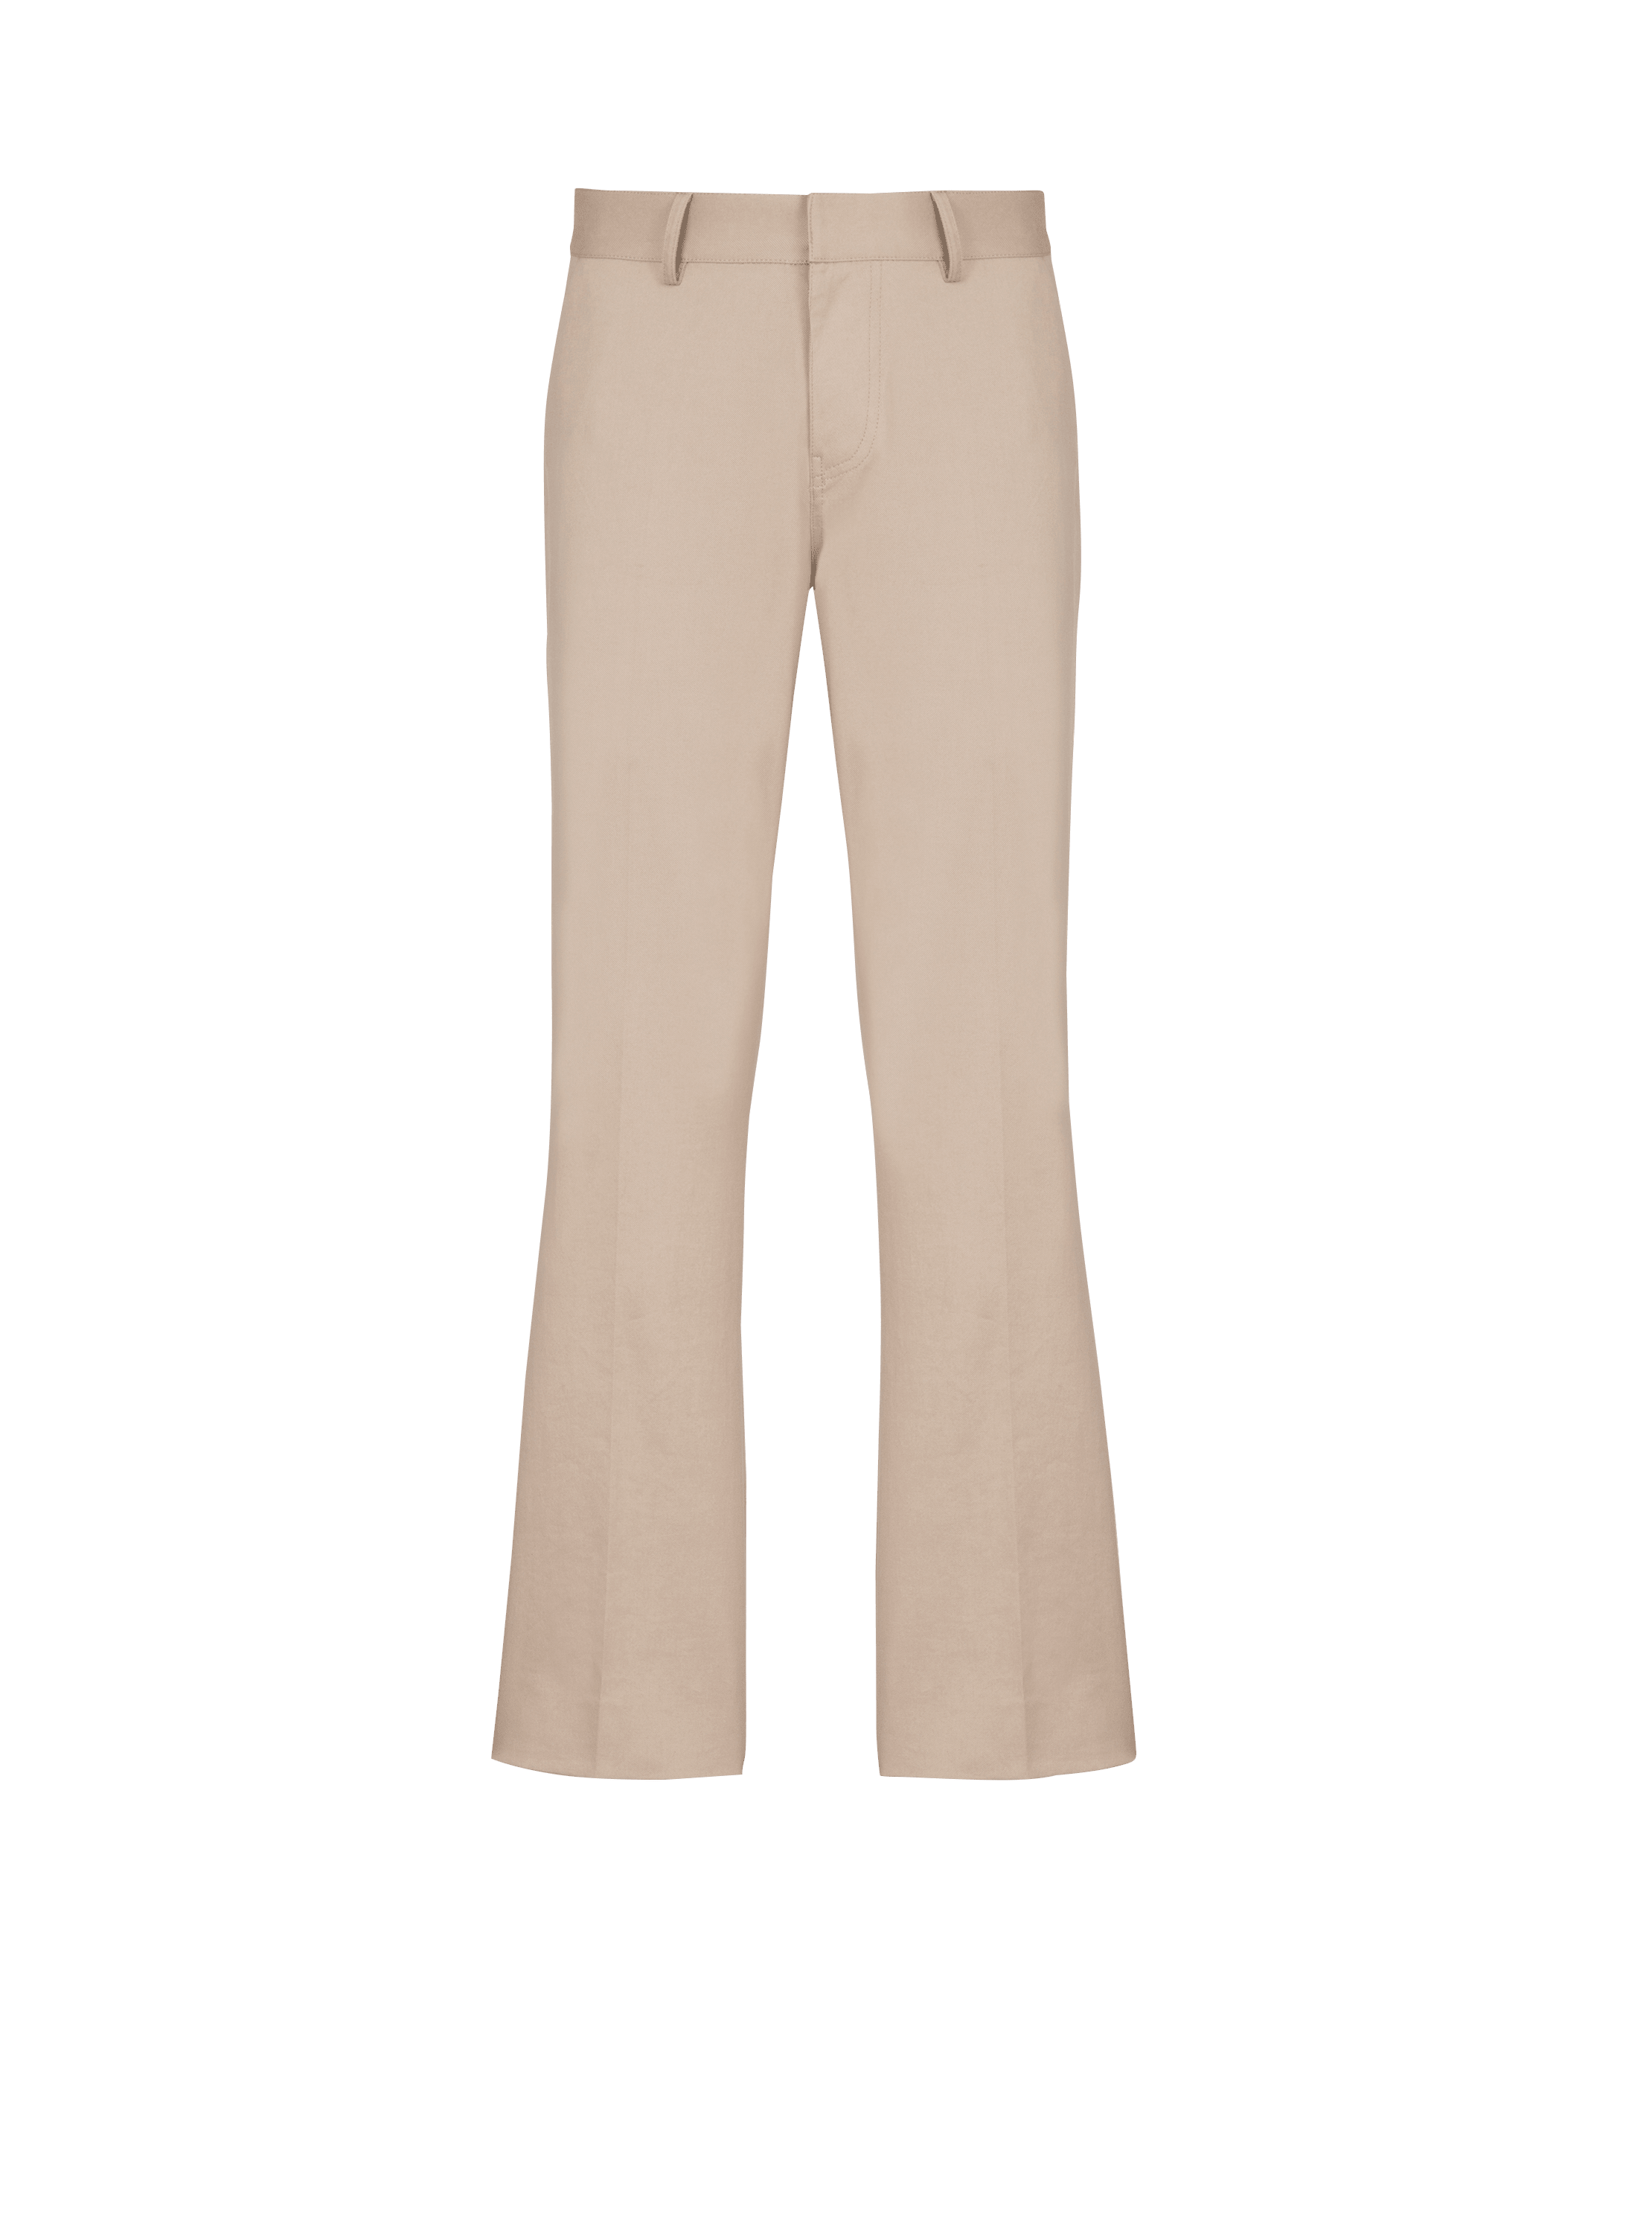 Buy Pu Mini Flare Pant Women's Bottoms from Fashion Lab. Find